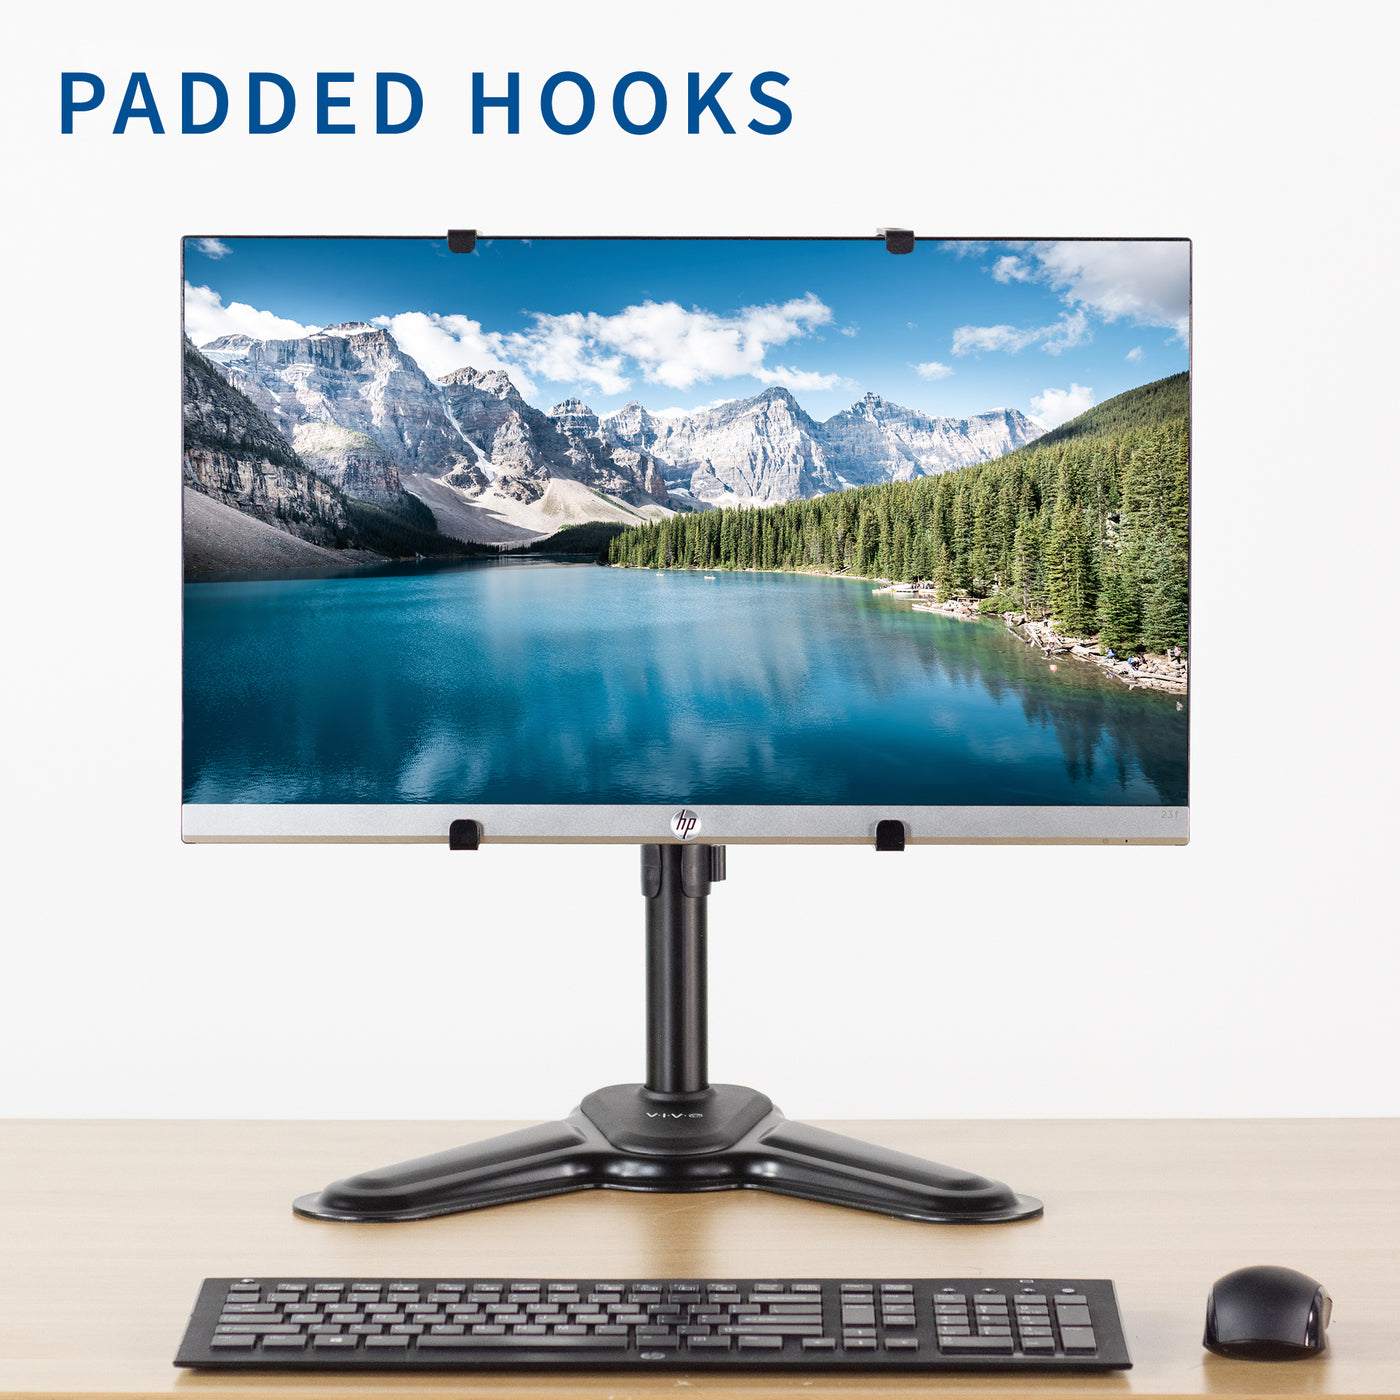 Padded hooks ensure the safety of your monitor while mounted to keep it in pristine condition.